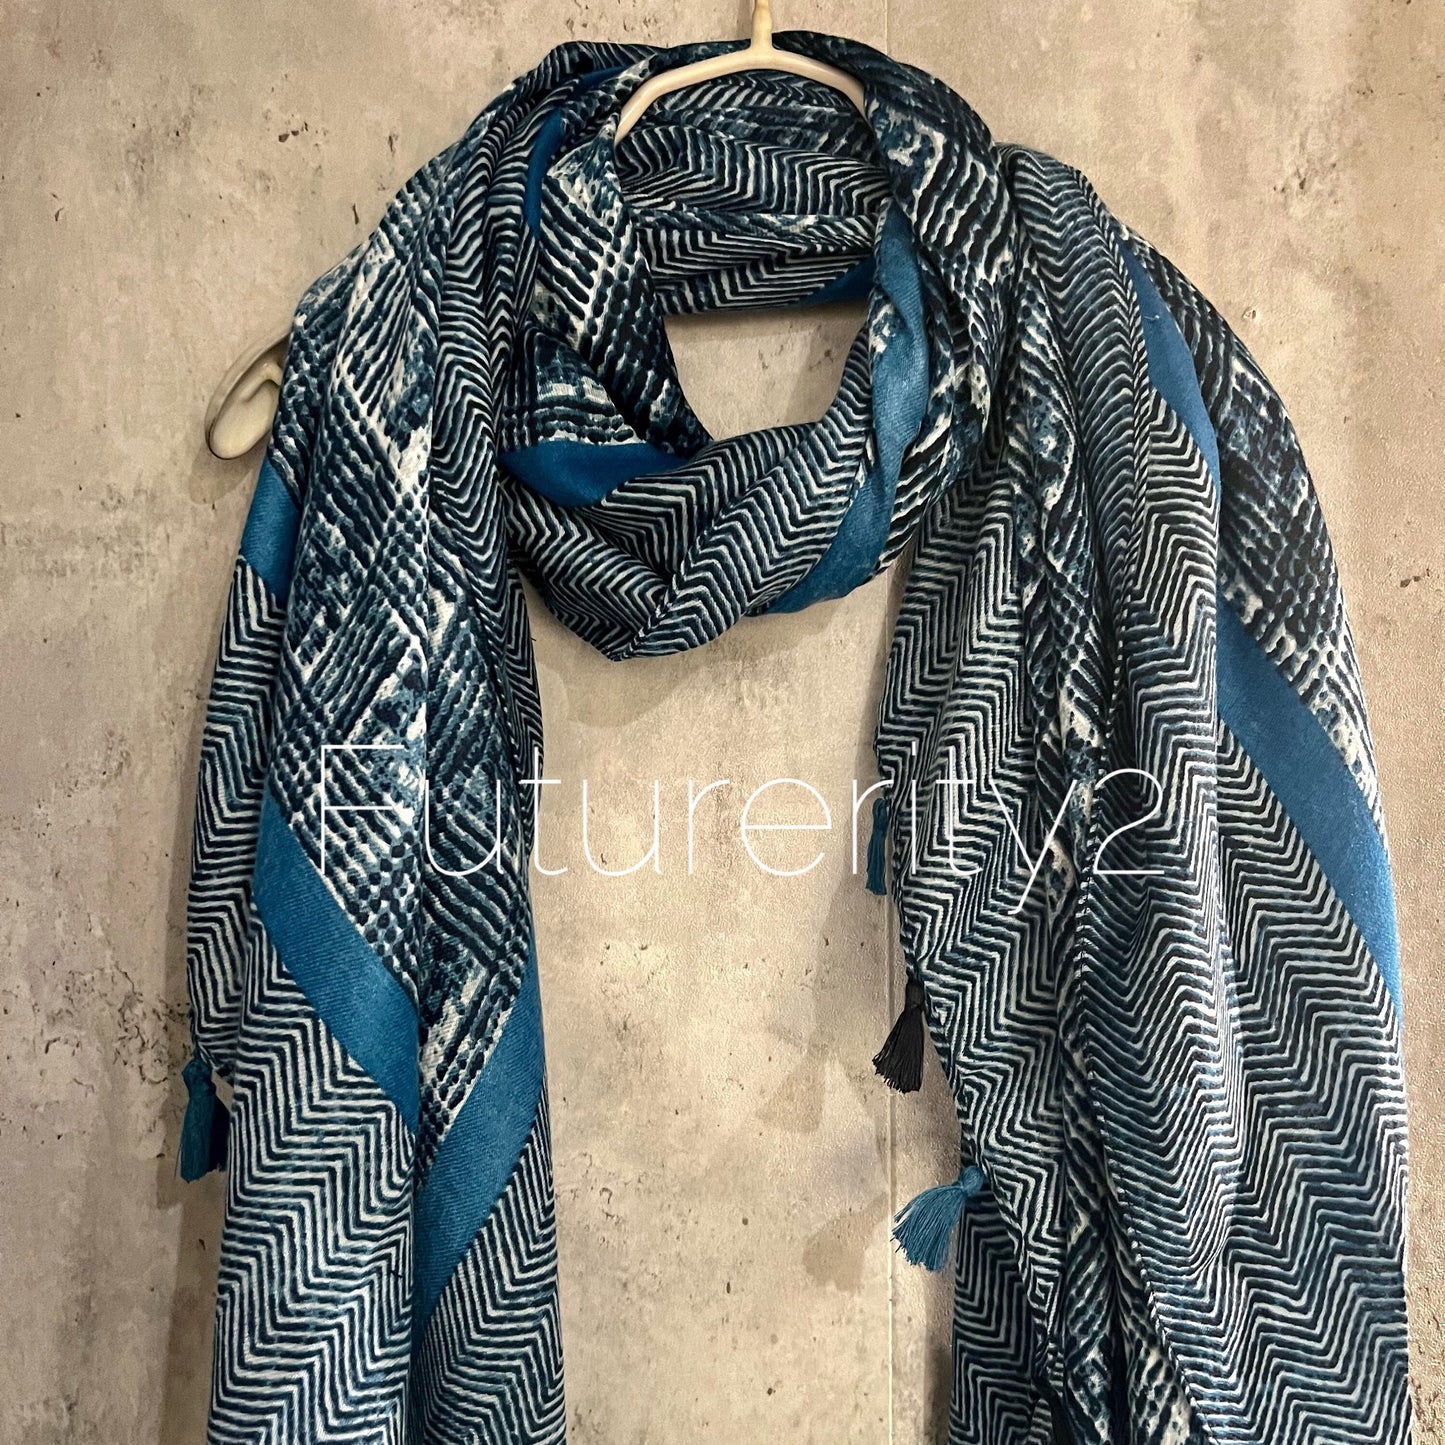 Tweed Pattern With Blue Trim Tassels Cotton Scarf/Summer Autumn Winter Scarf/Gifts For Her Birthday Christmas/Gift For Mum/UK Seller